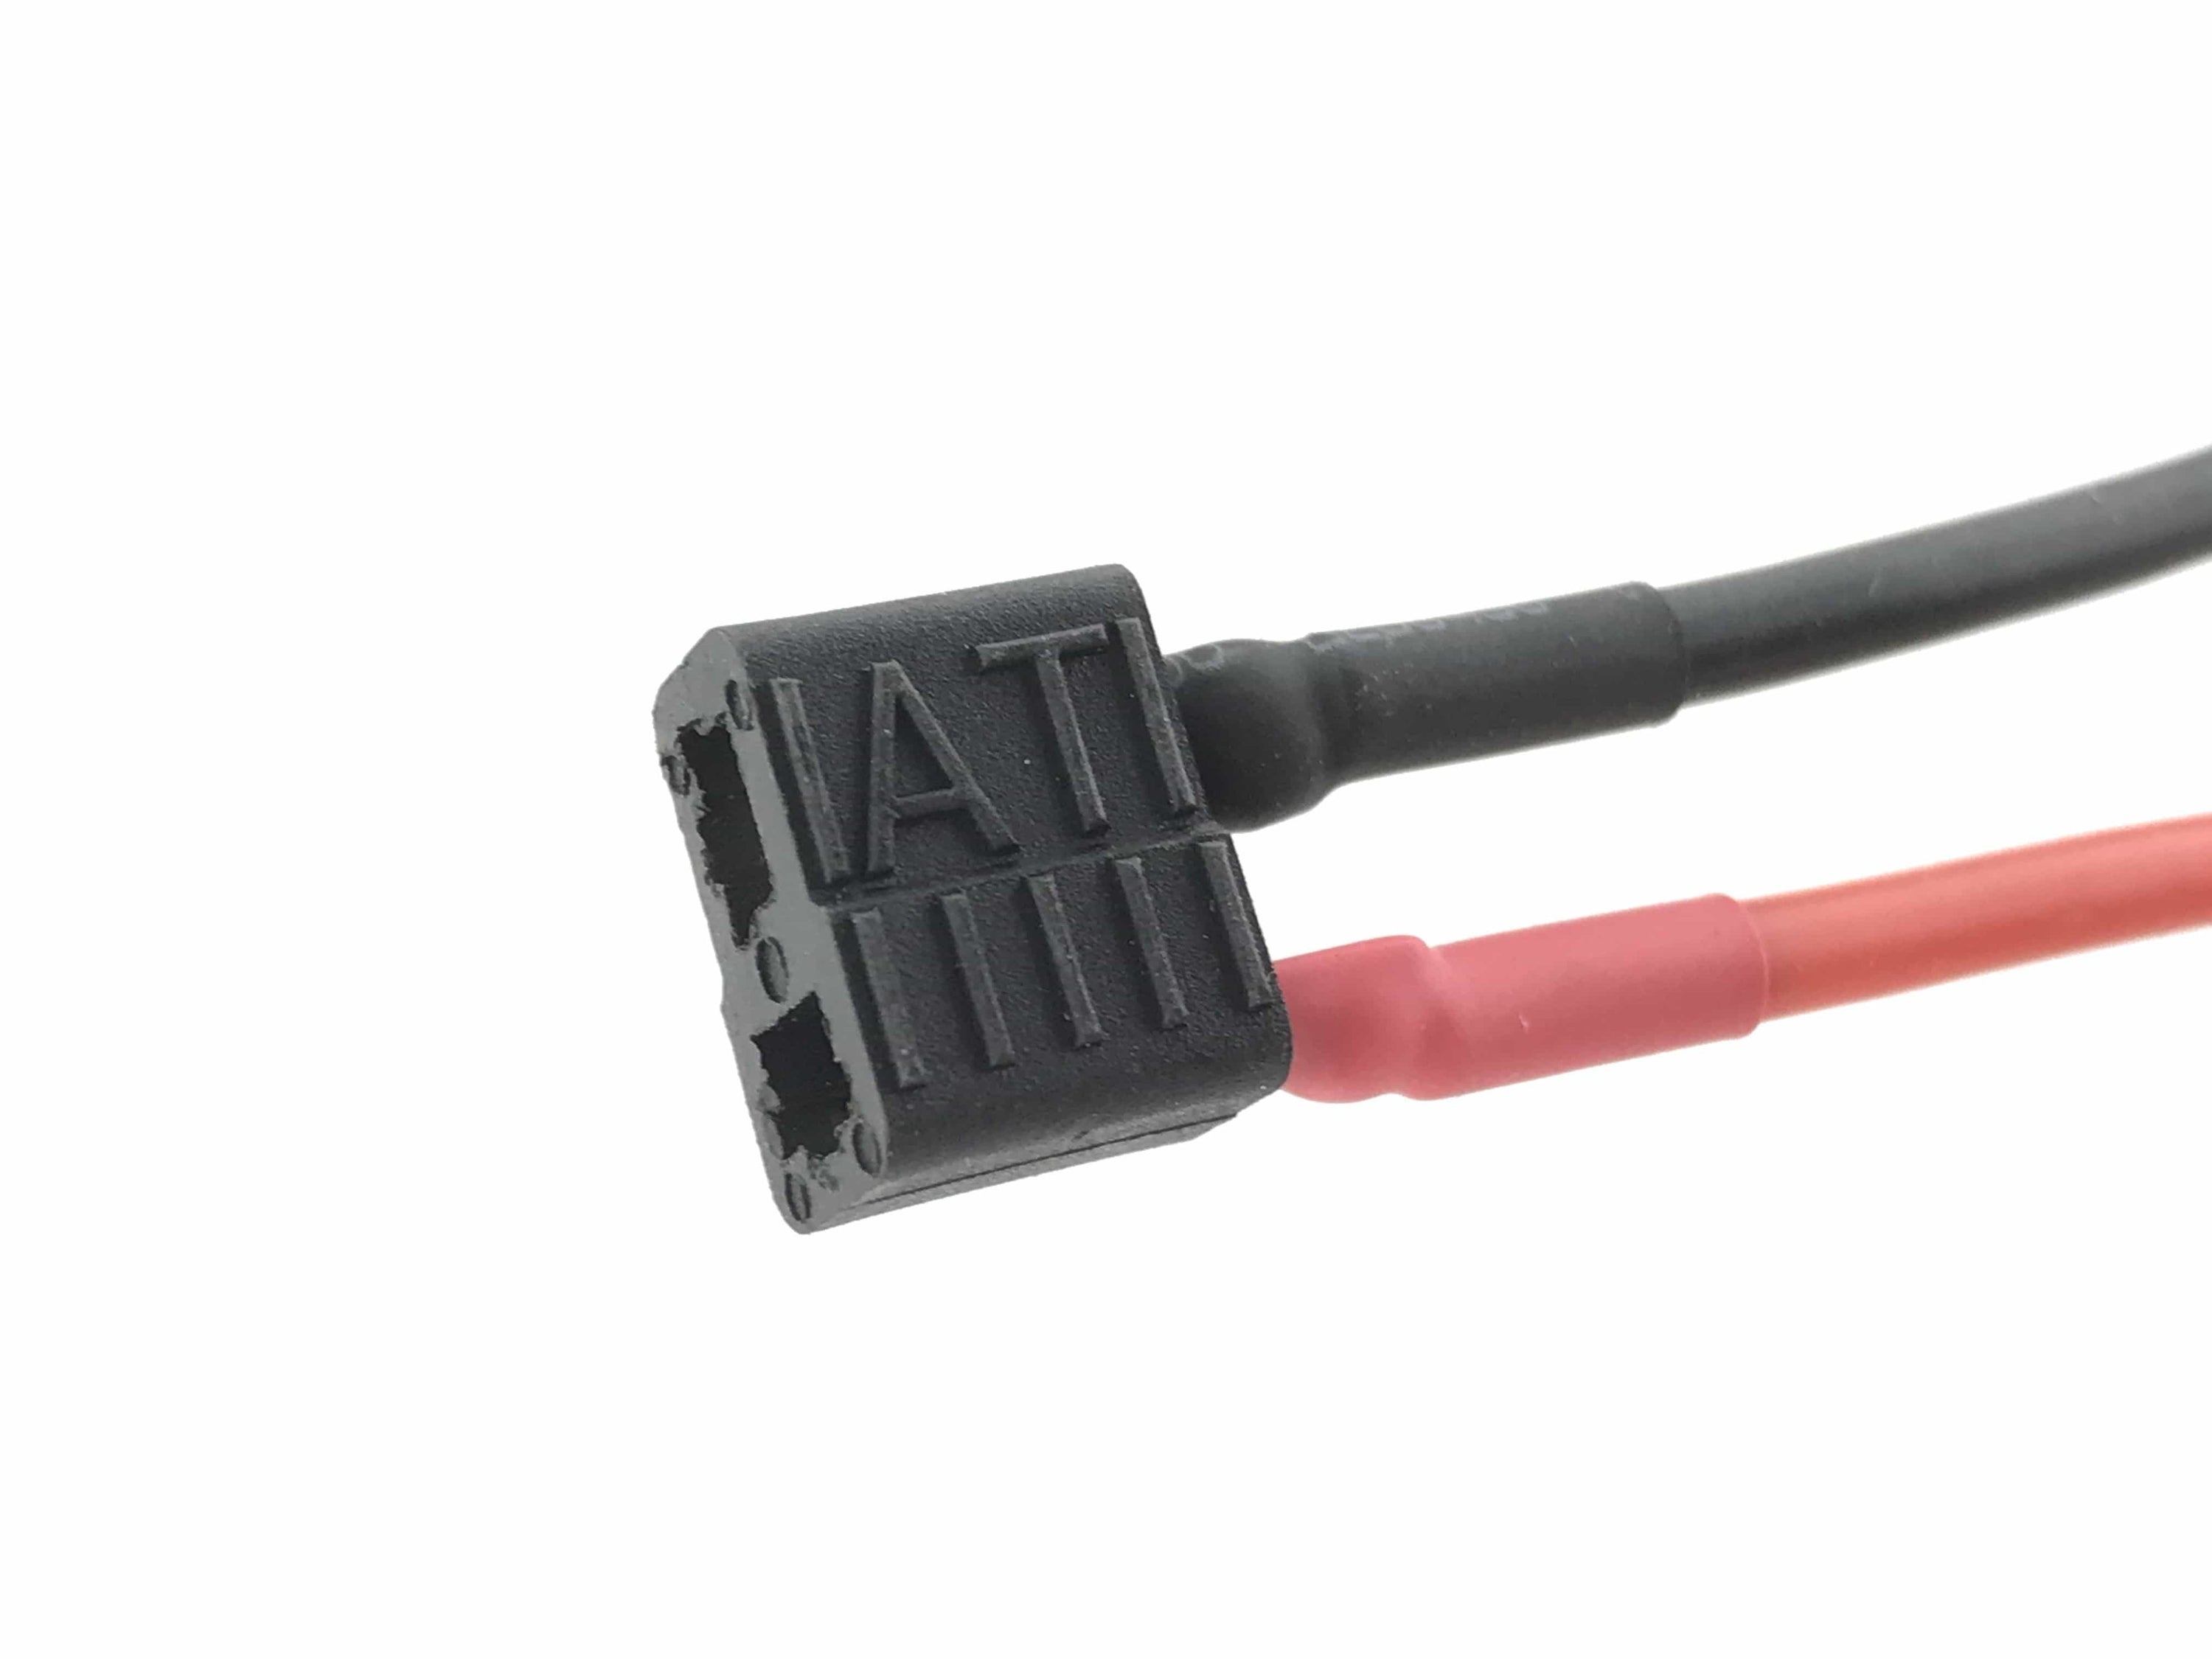 Titan 3000mAh 11.1v Nunchuck T-Plug (Deans) - Eminent Paintball And Airsoft